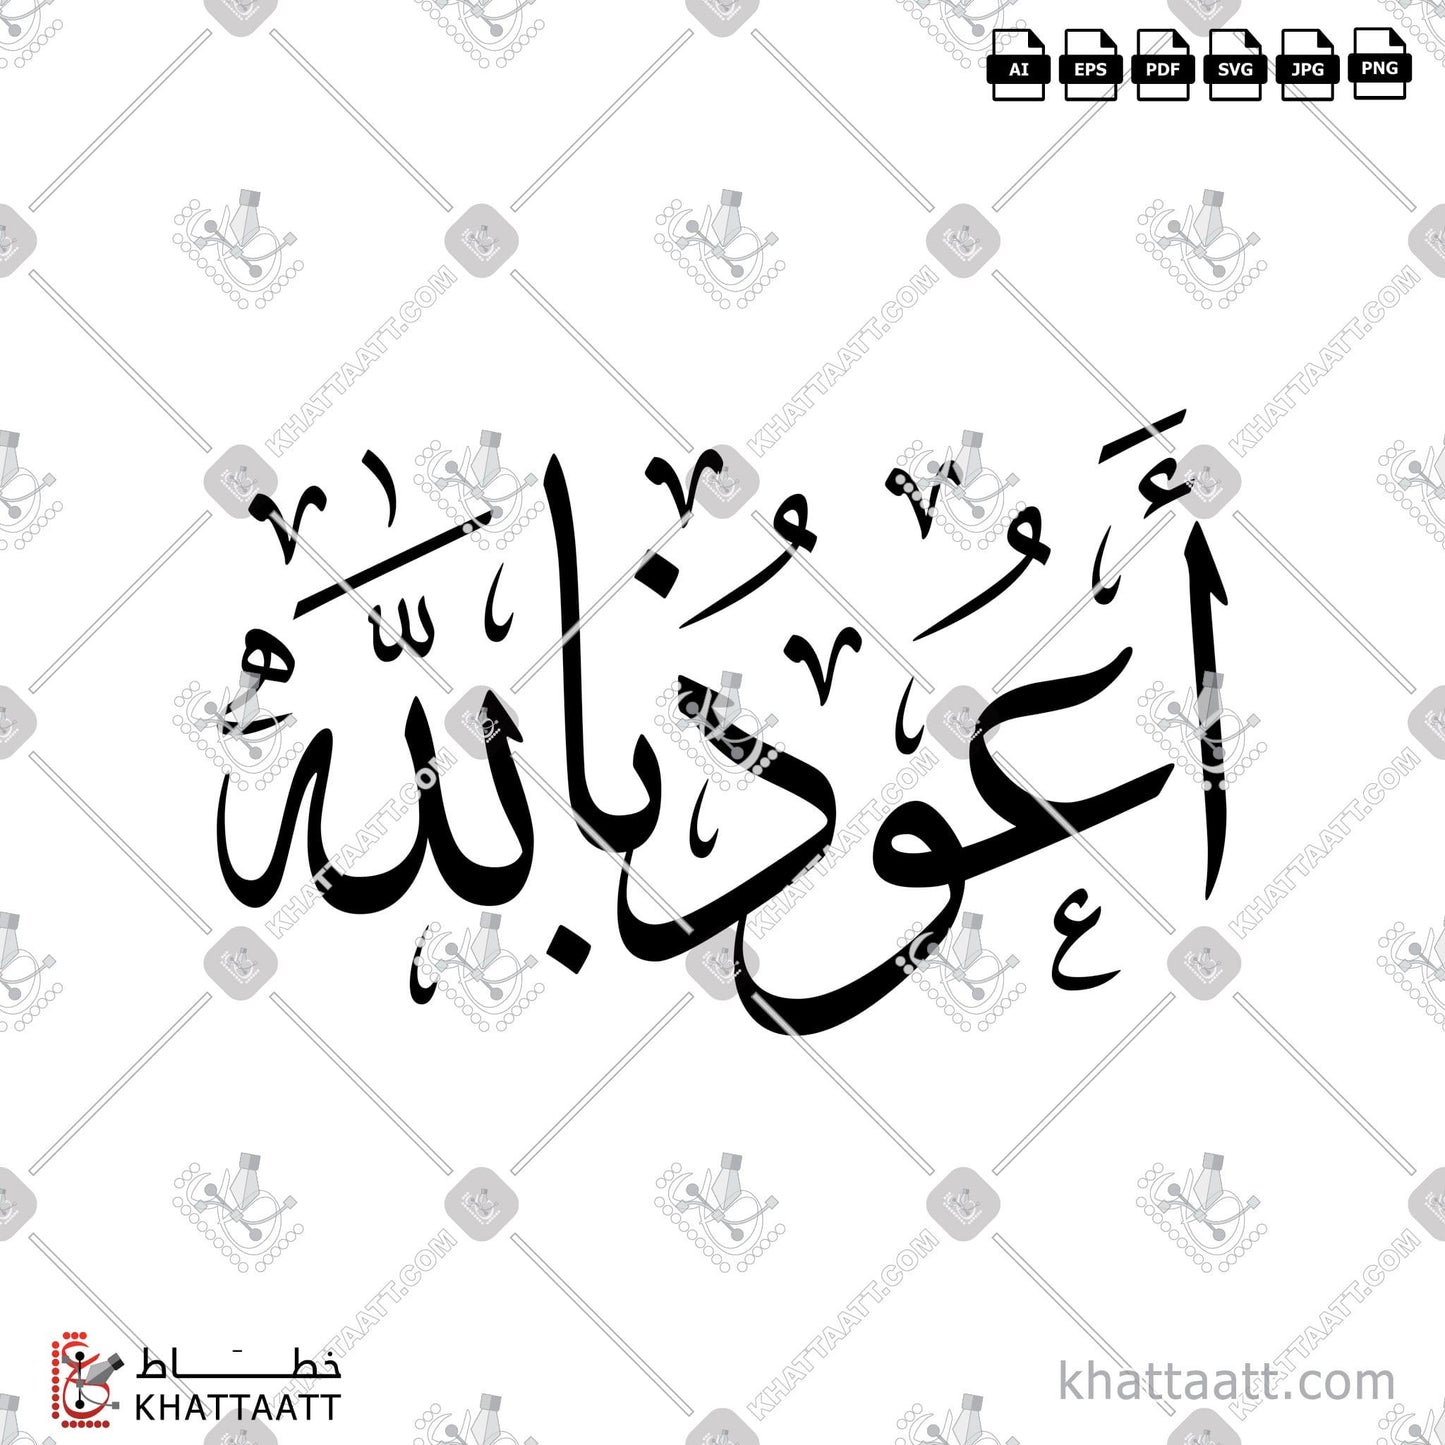 Download Arabic Calligraphy of Auzubillah - أعوذ بالله in Thuluth - خط الثلث in vector and .png